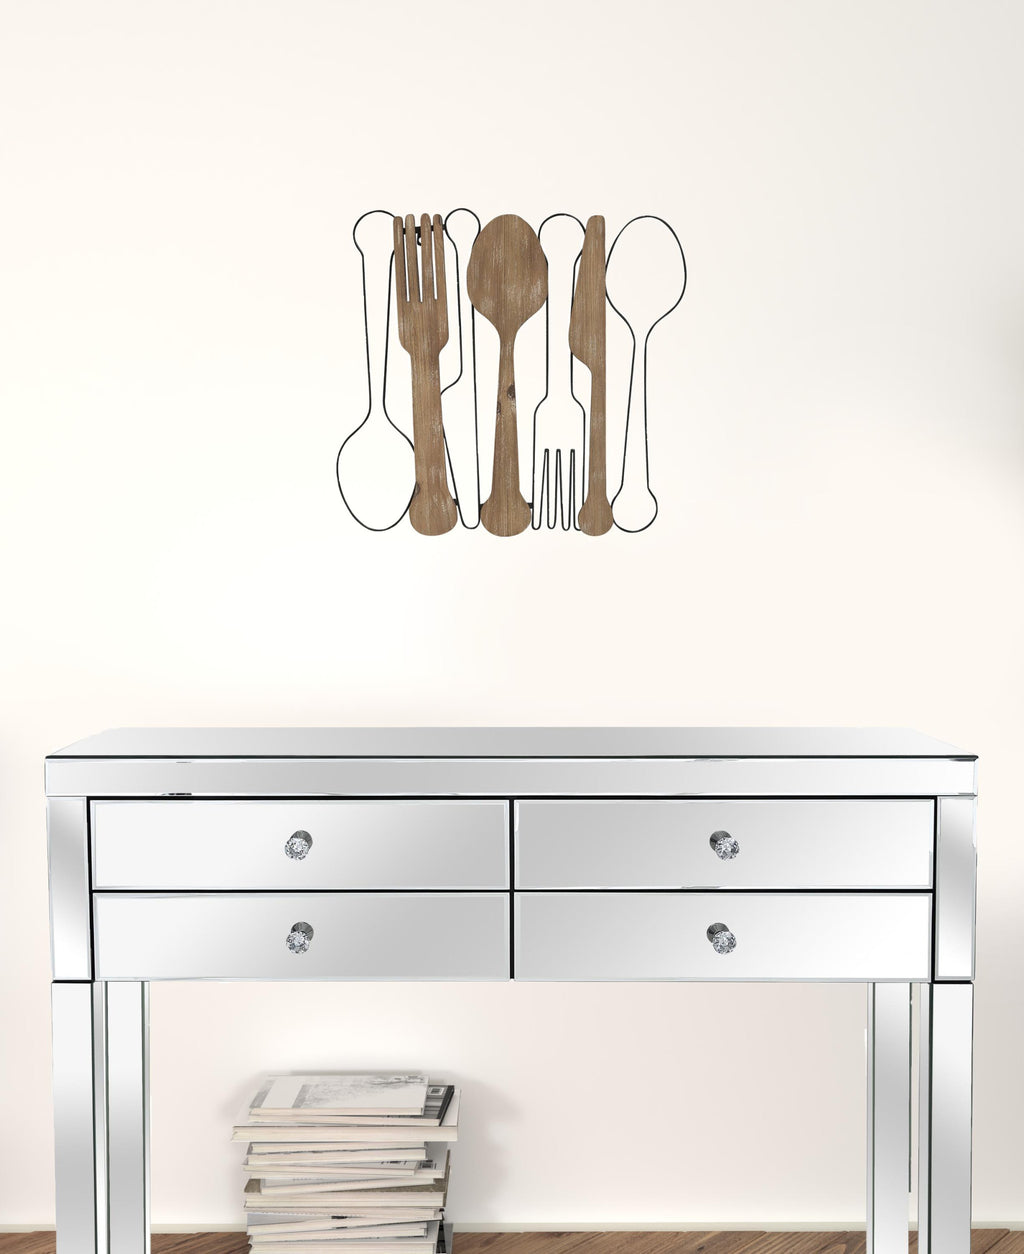 Kitchen Utensils Wall Decor With Metal Outlines - 99fab 